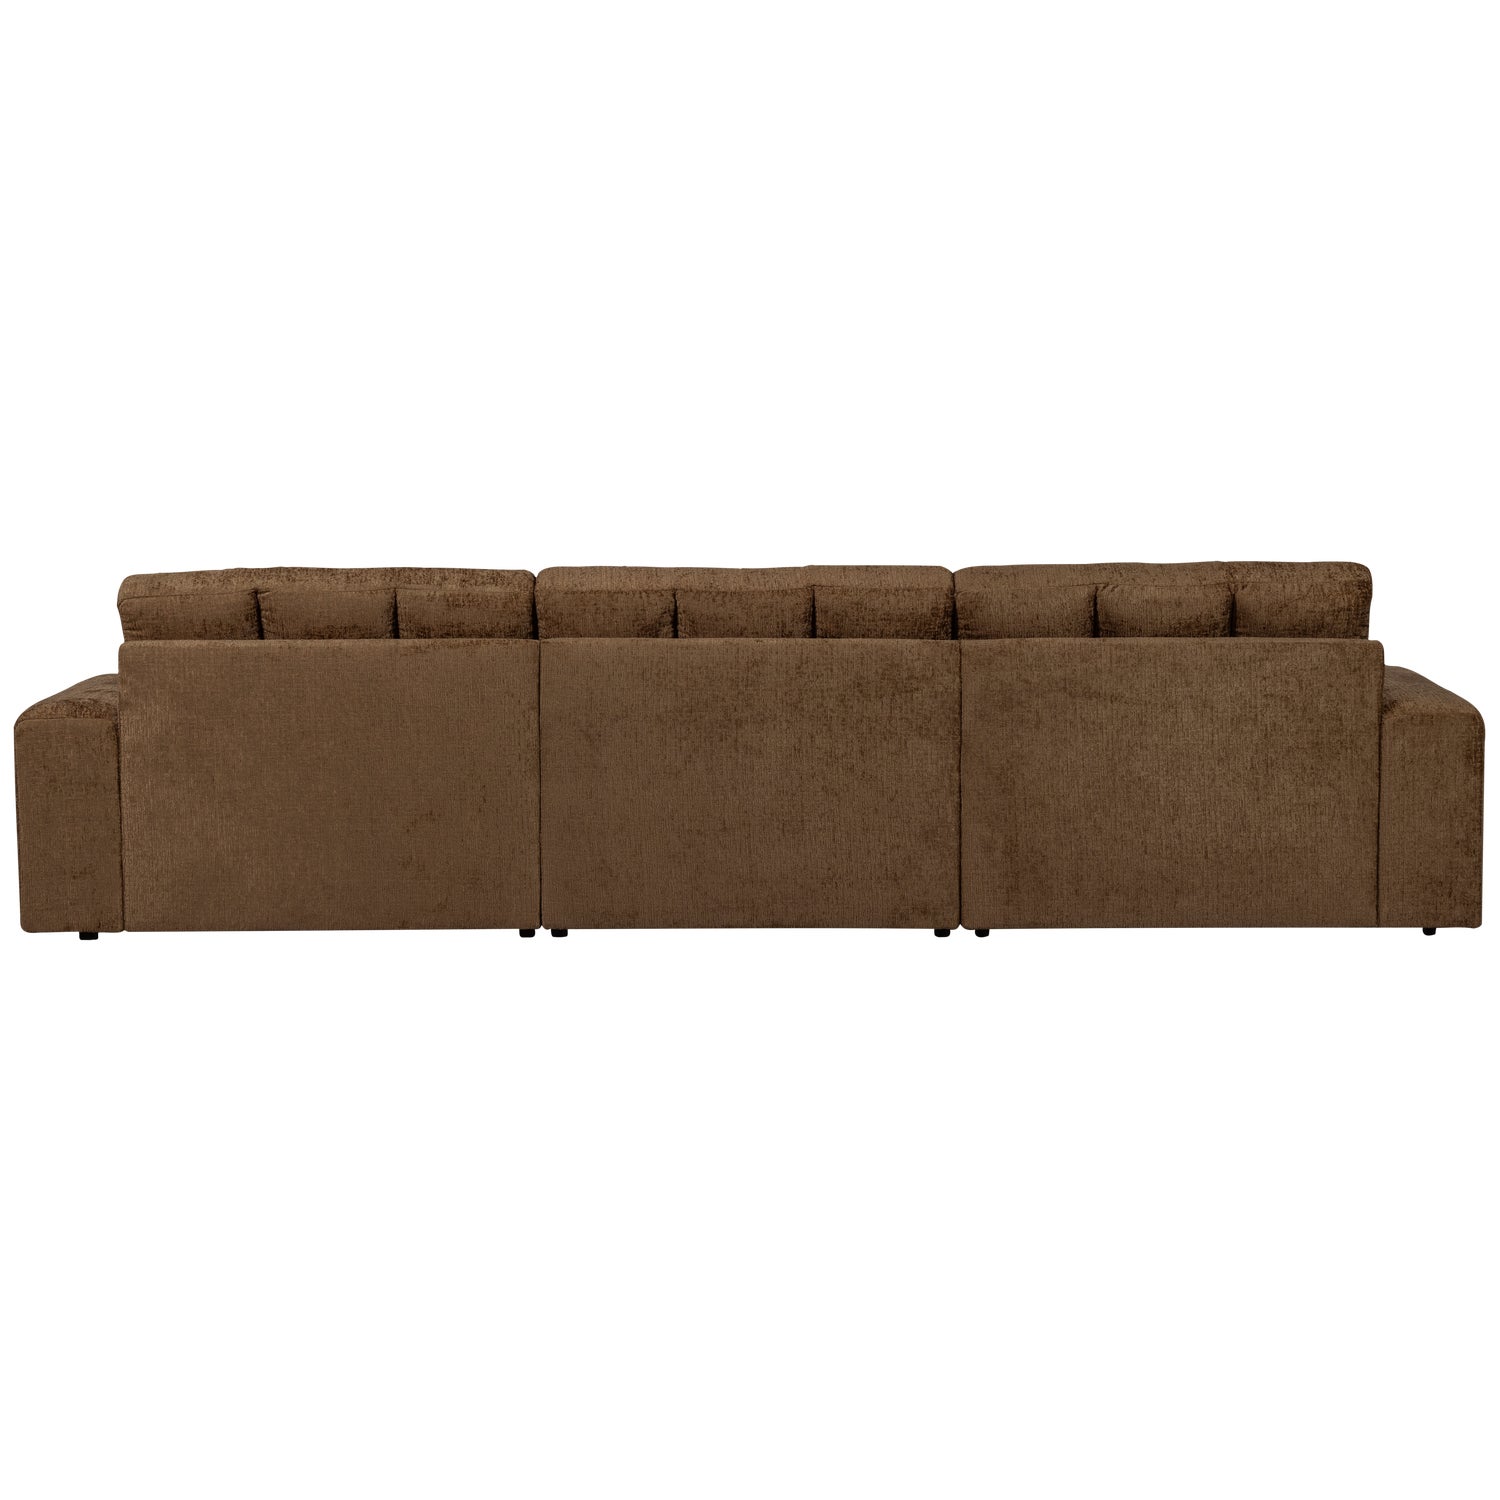 379012-BR-04_VS_WE_Second_date_chaise_longue_links_structure_velvet_brass_AK1.png?auto=webp&format=png&width=1500&height=1500